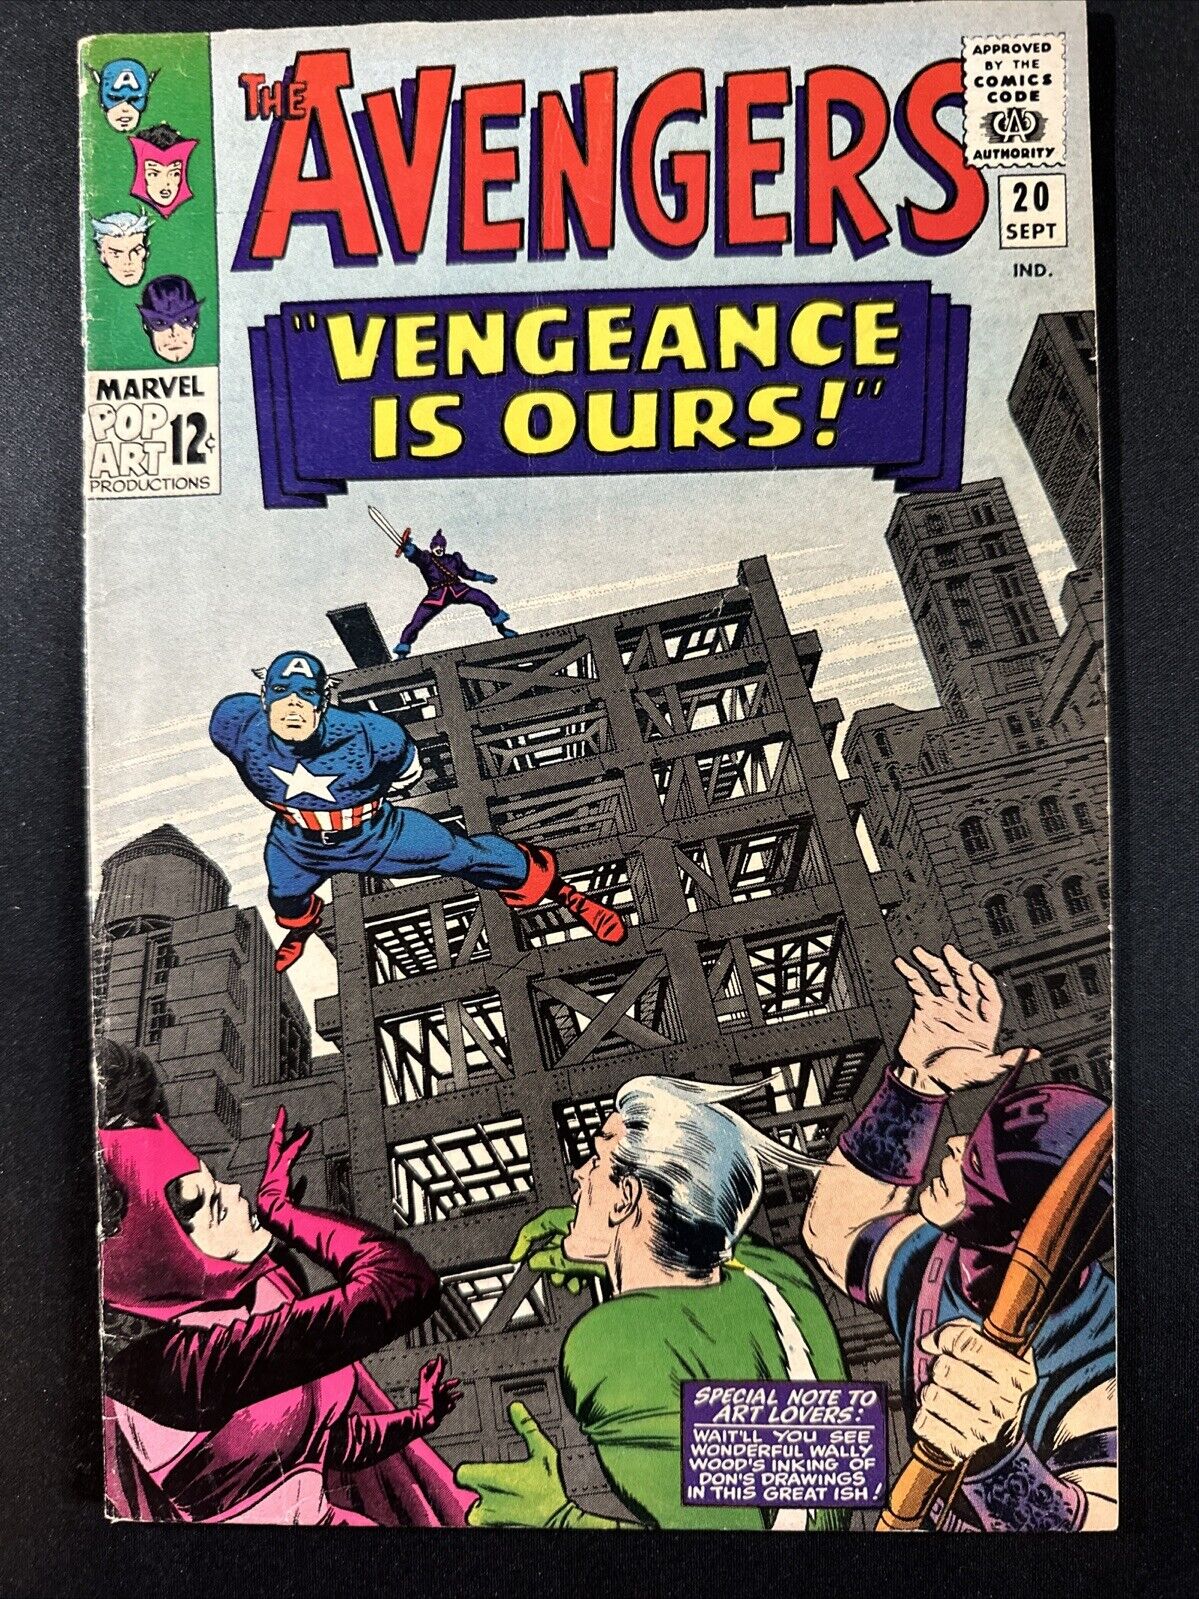 The Avengers #20 1965 Vintage Old Marvel Comics Silver Age 1st Print VG *A3